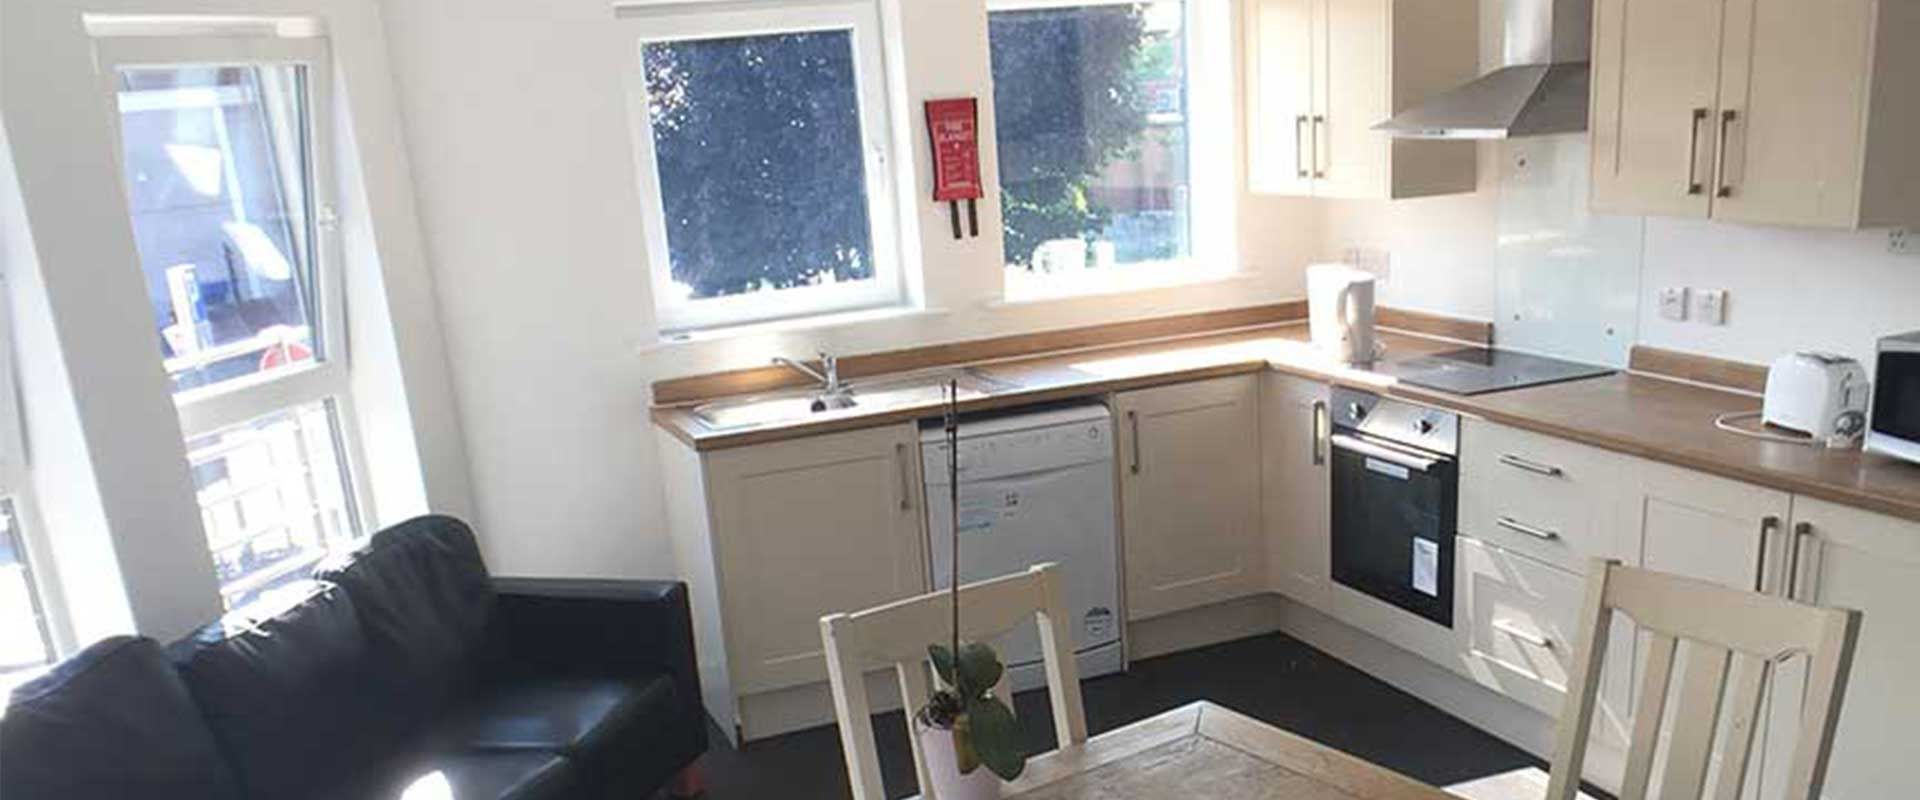 The Student Block Loughborough Accommodation - Enjoy large, bright shared kitchens in every flat